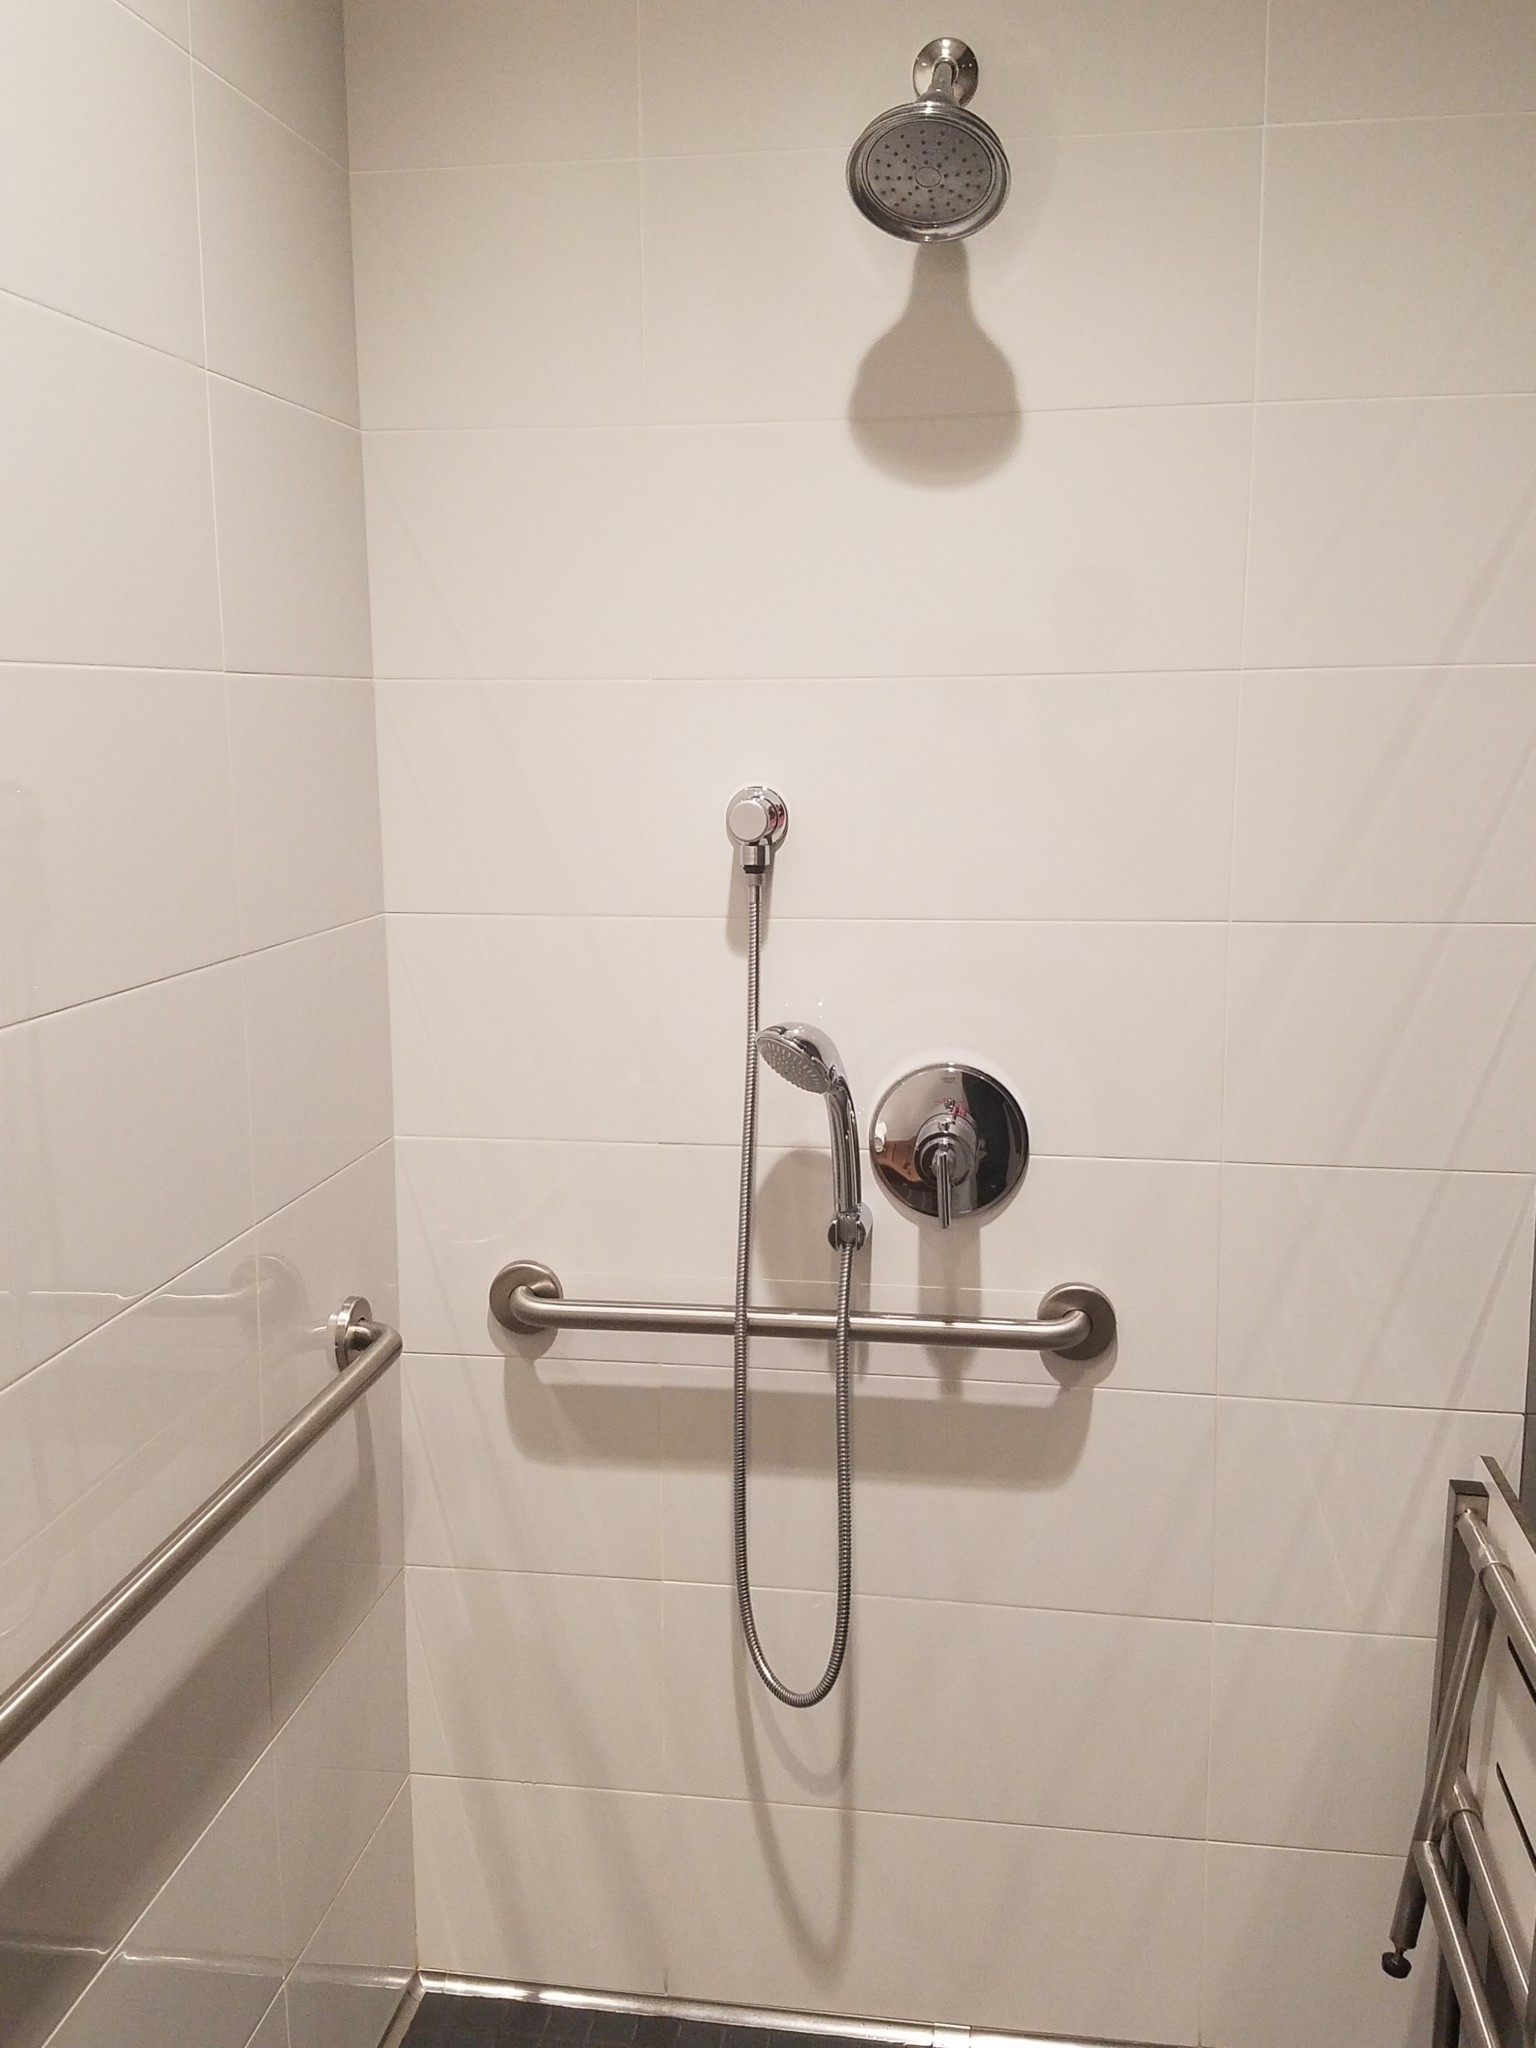 The shower